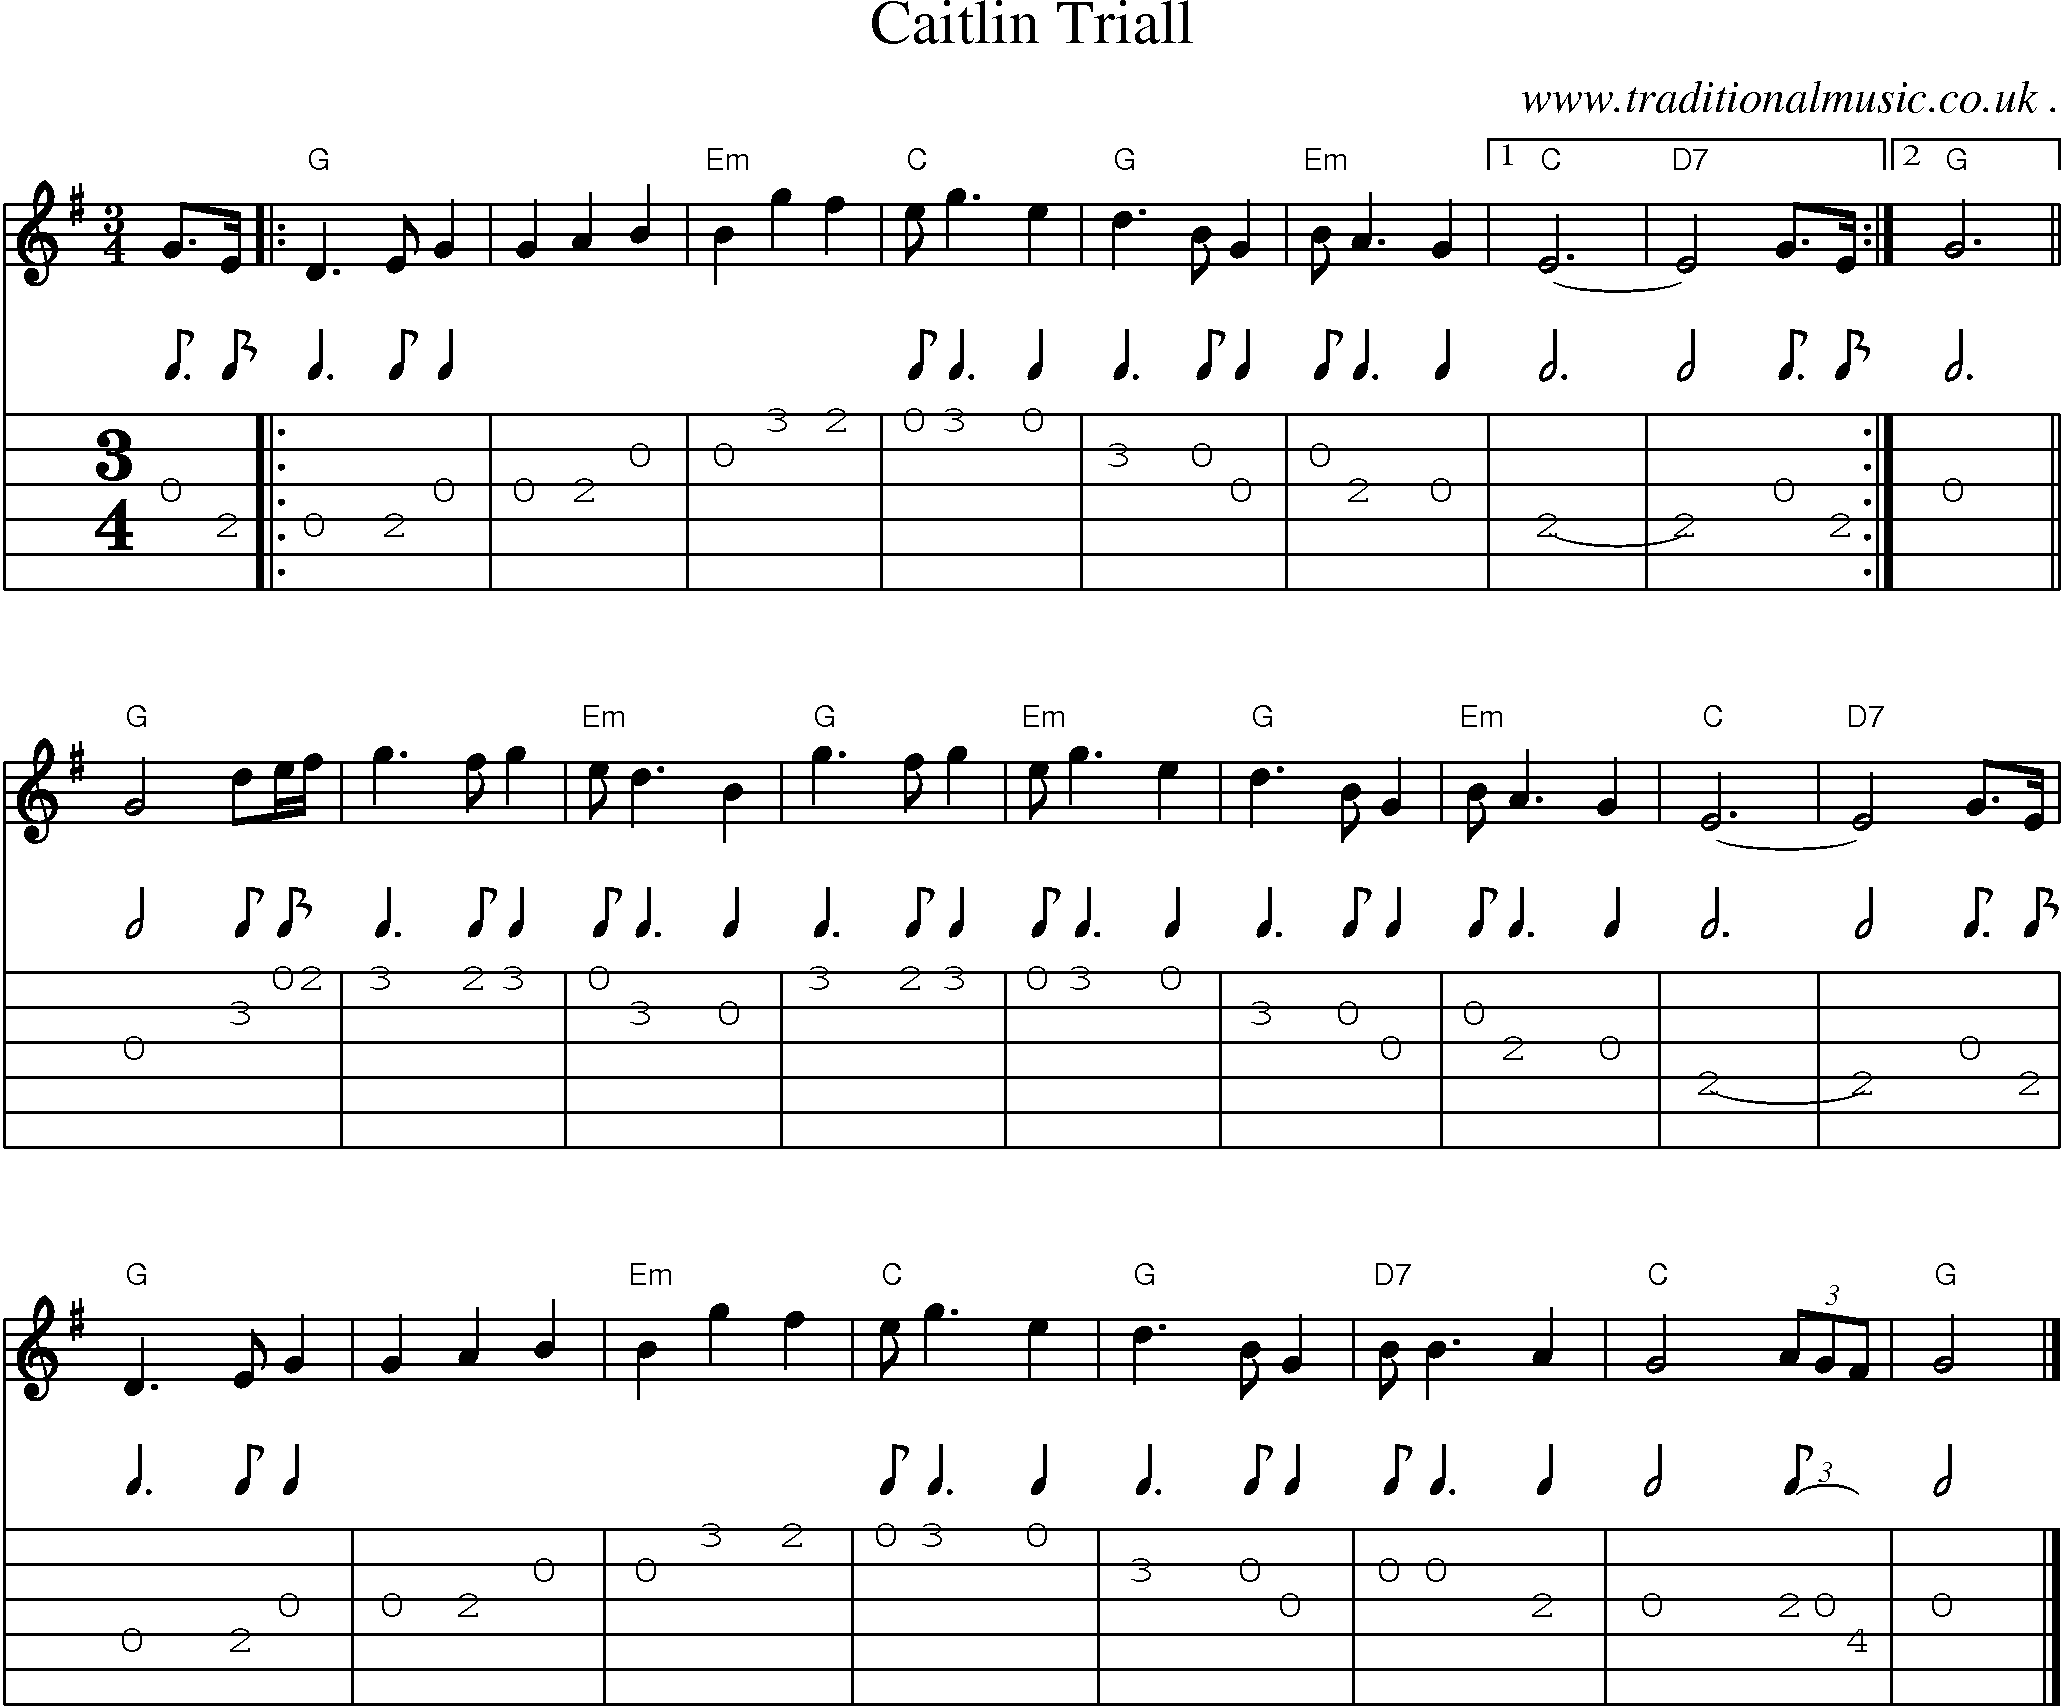 Music Score and Guitar Tabs for Caitlin Triall